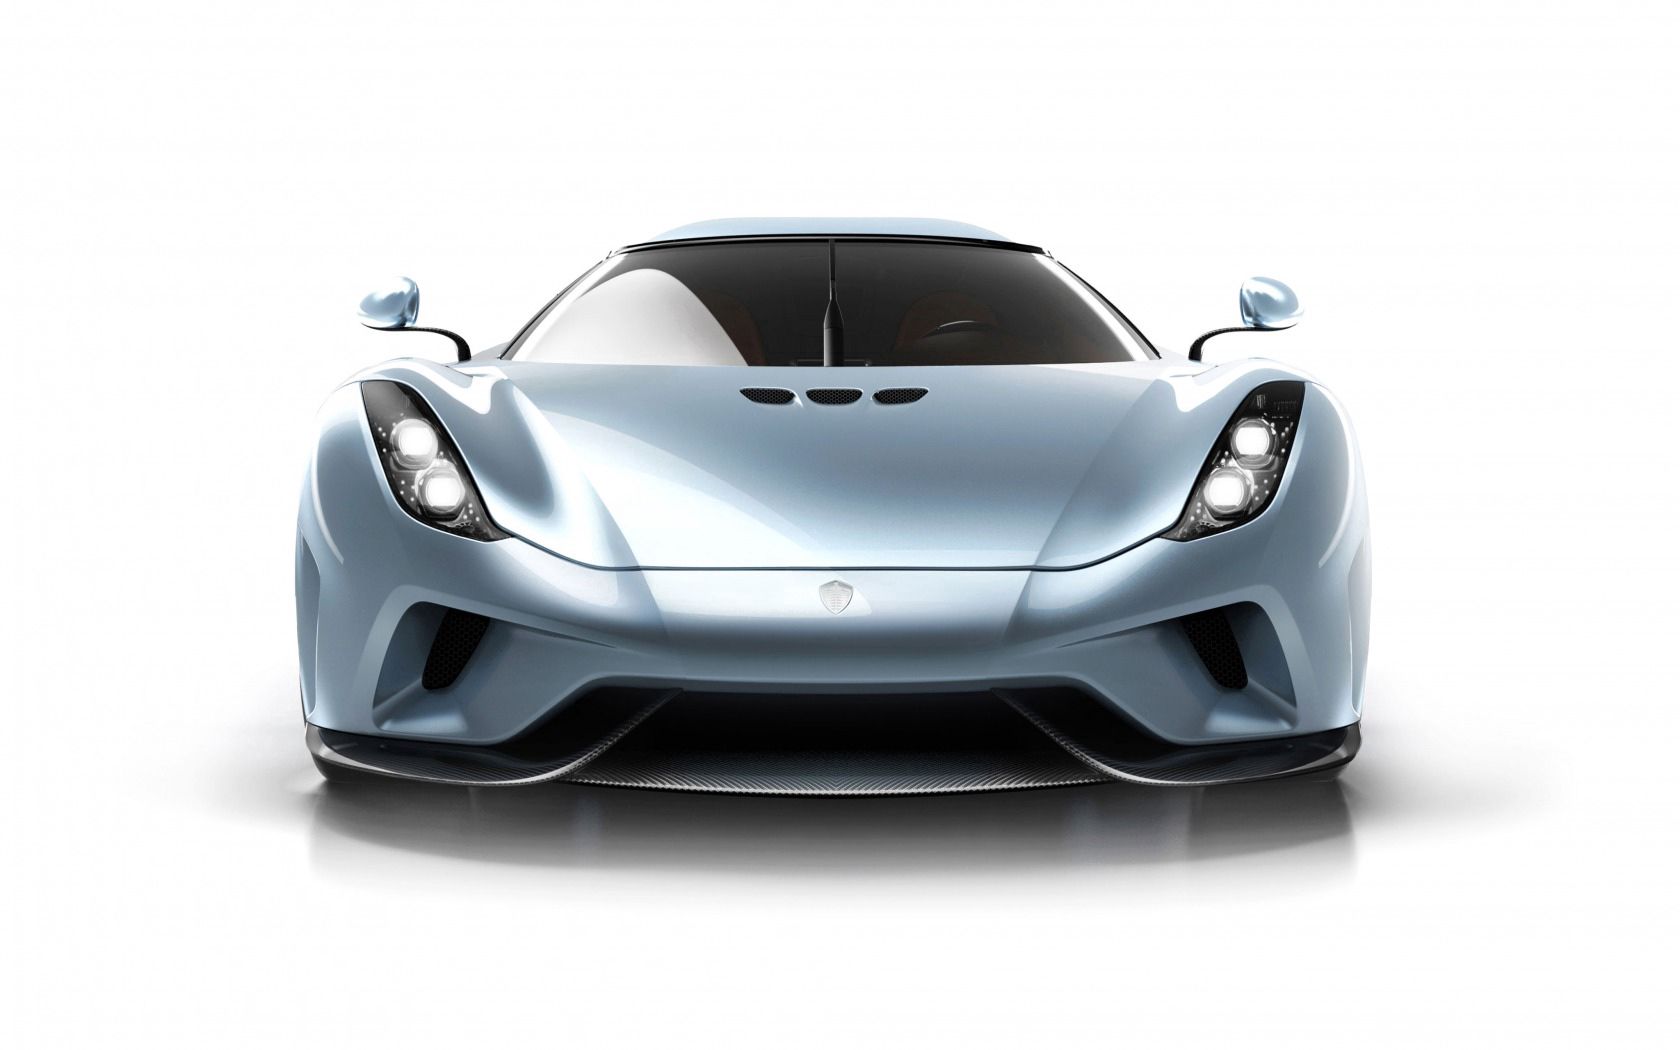 koenigsegg, cars, front view, silver, silvery, 2015, regera images